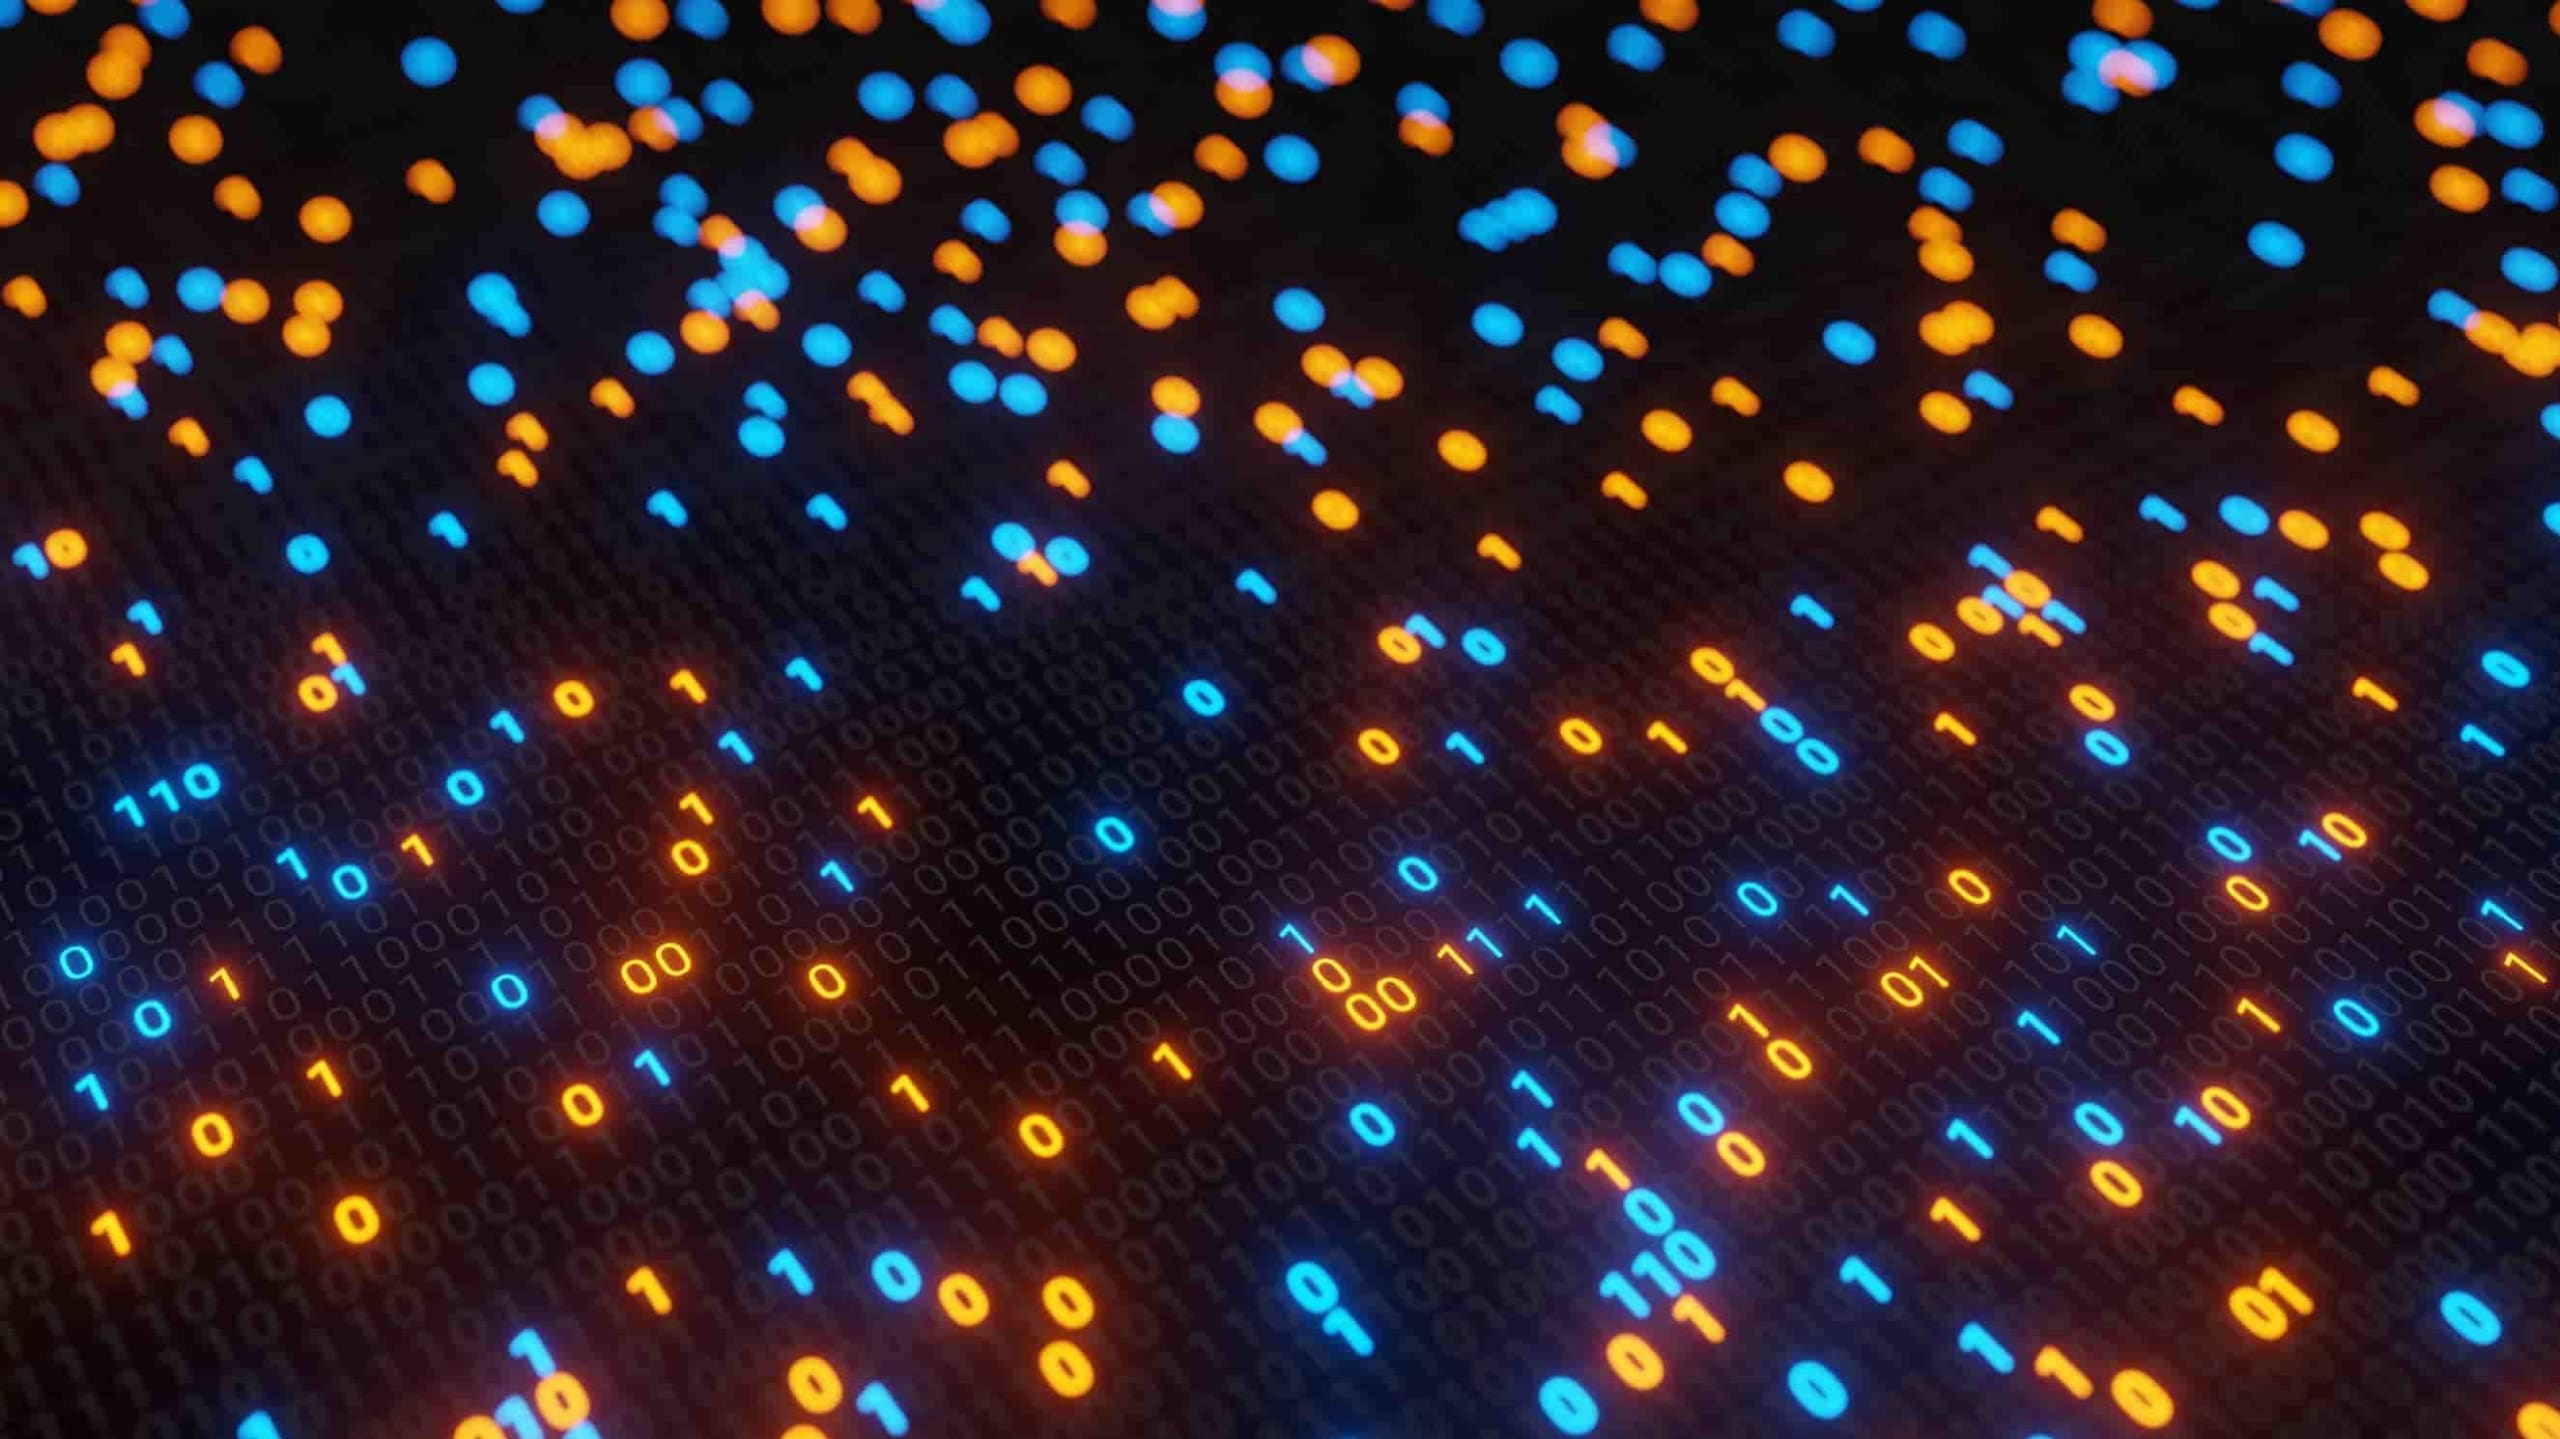 Blurry blue and orange lights over a digital binary code background, symbolizing data, technology, or cybersecurity concepts.